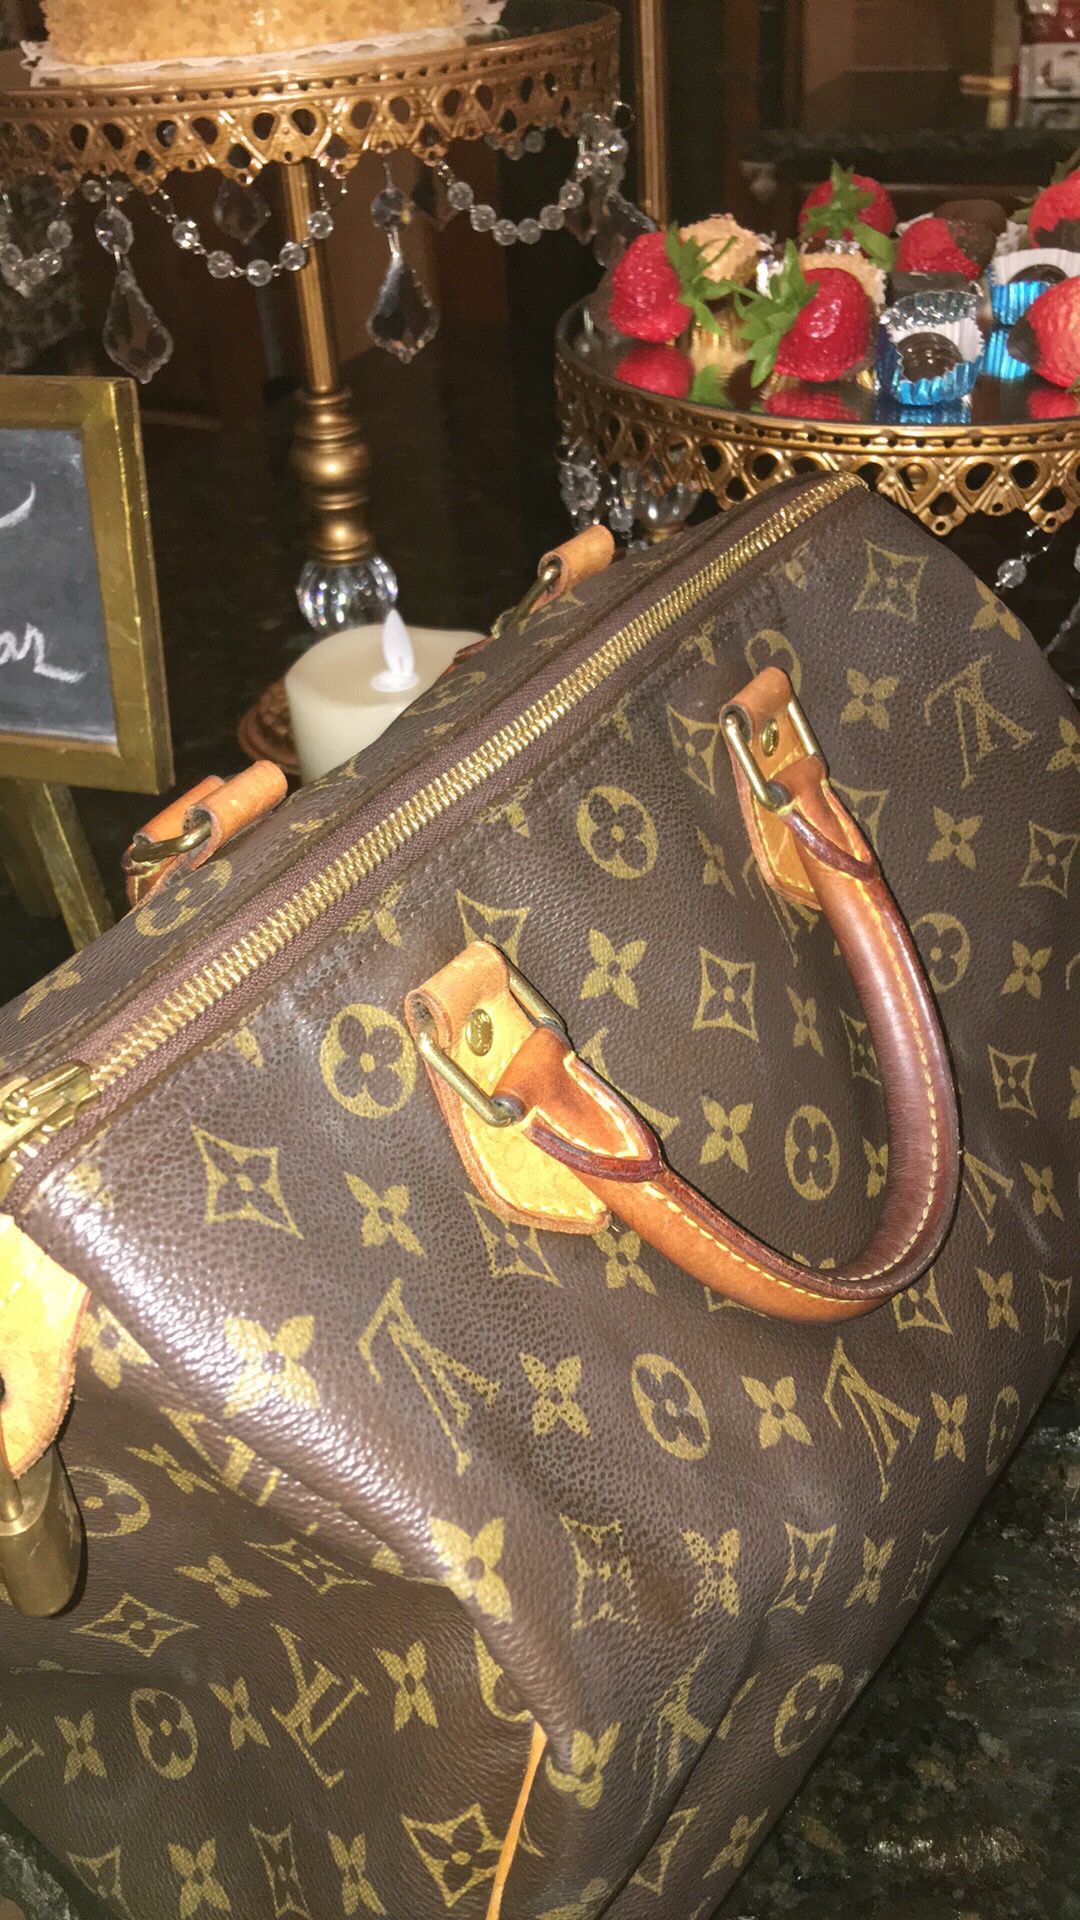 Louis Vuitton Vintage Speedy 30 for Sale in Guadalupe, AZ - OfferUp